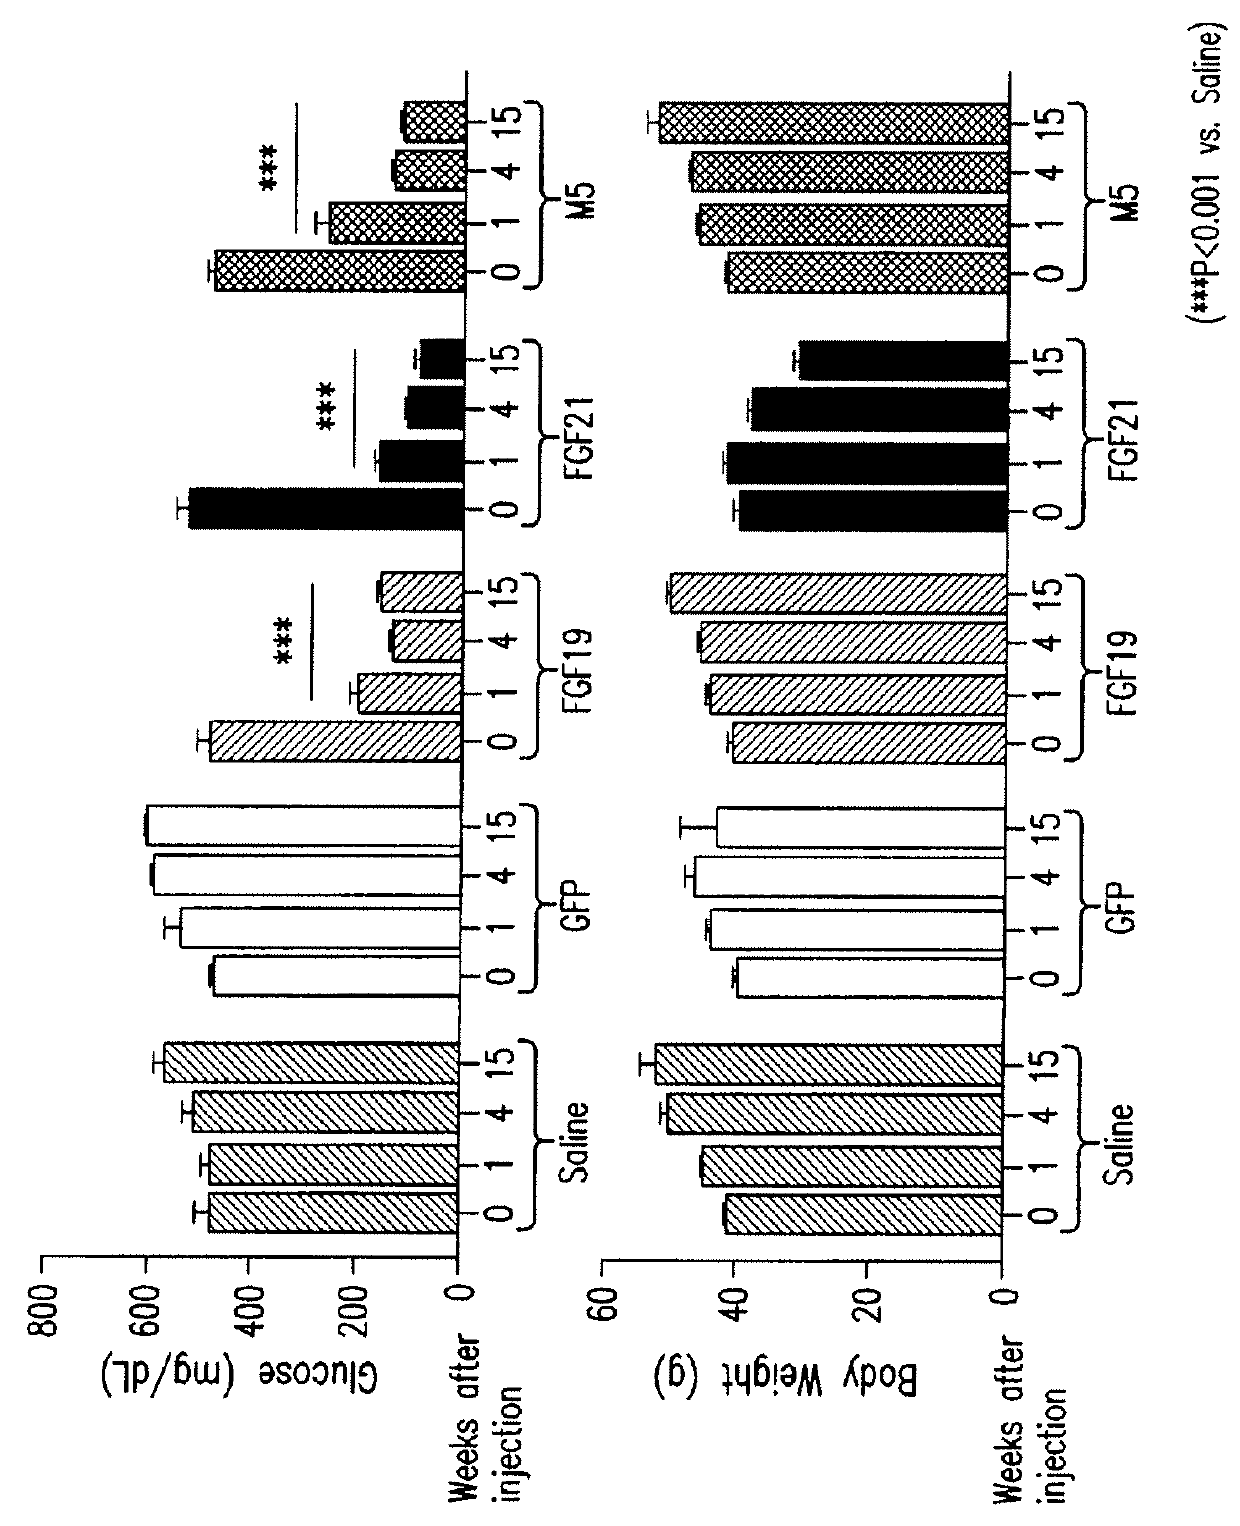 Methods of using compositions comprising variants and fusions of FGF19 polypeptides for reducing glucose levels in a subject